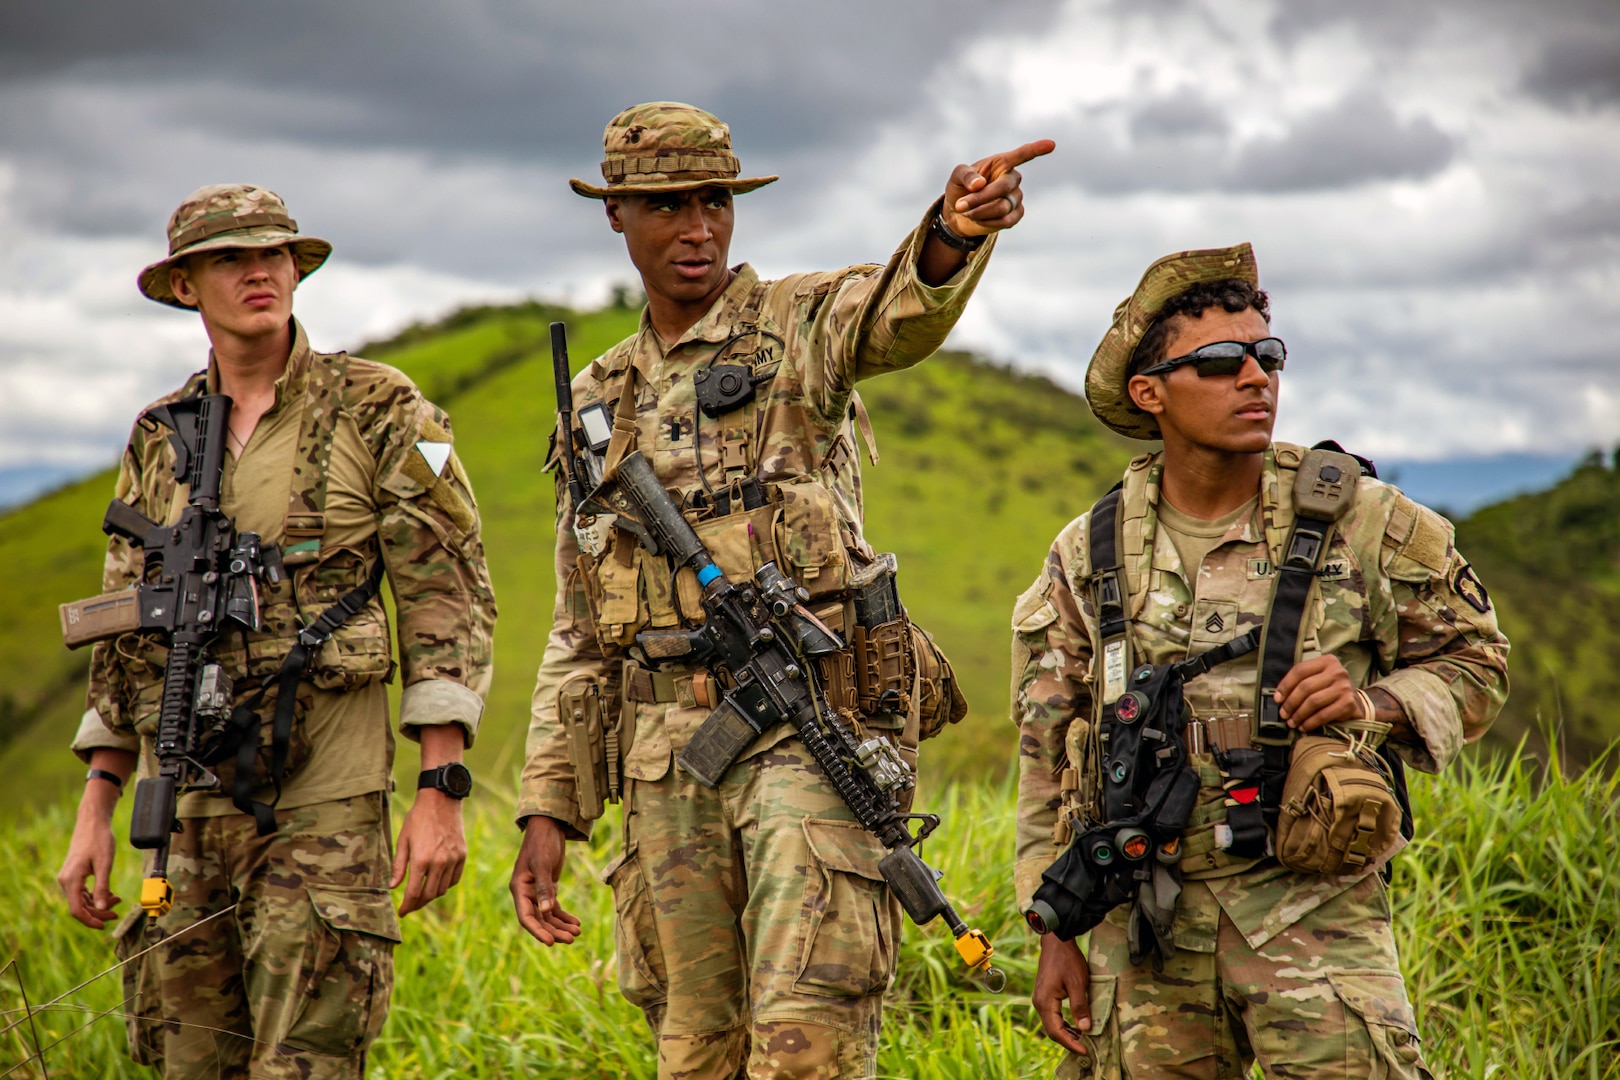 Southern Vanguard 22 concludes, completing the largest operation between U.S. and Brazil since World War II